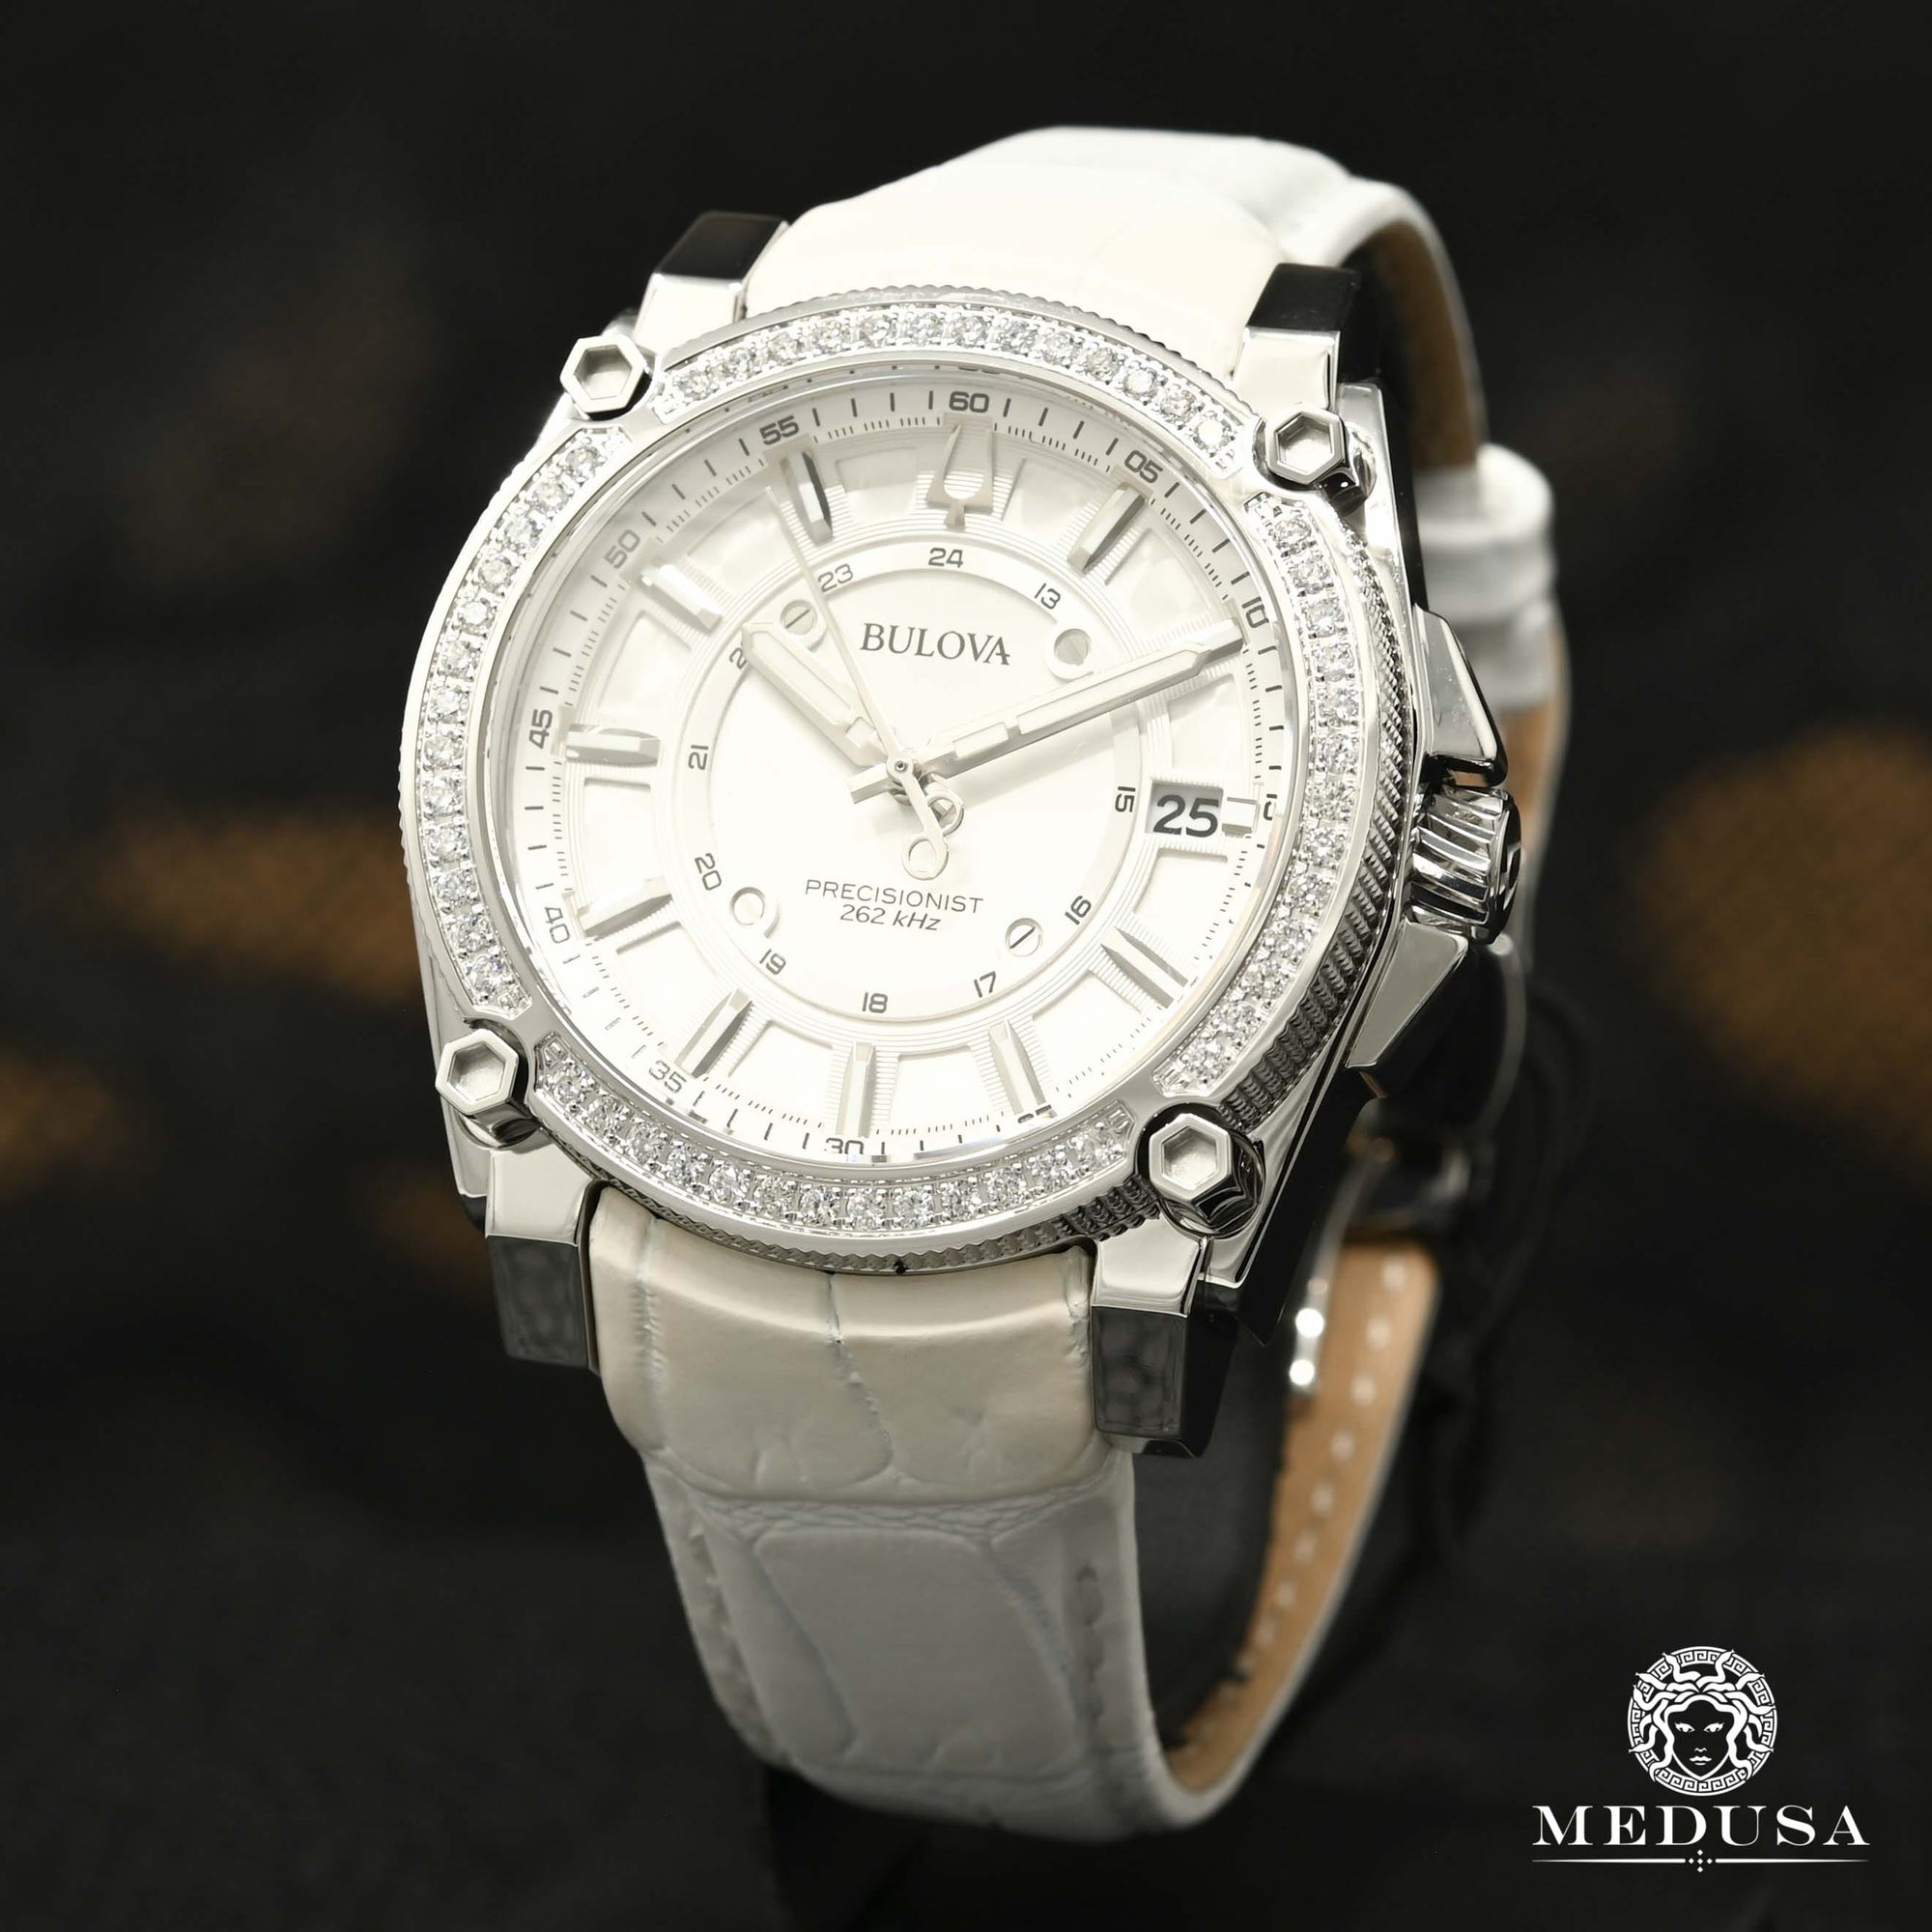 Montre Bulova | Montre Homme Bulova Icon Collection - 96J122 Stainless